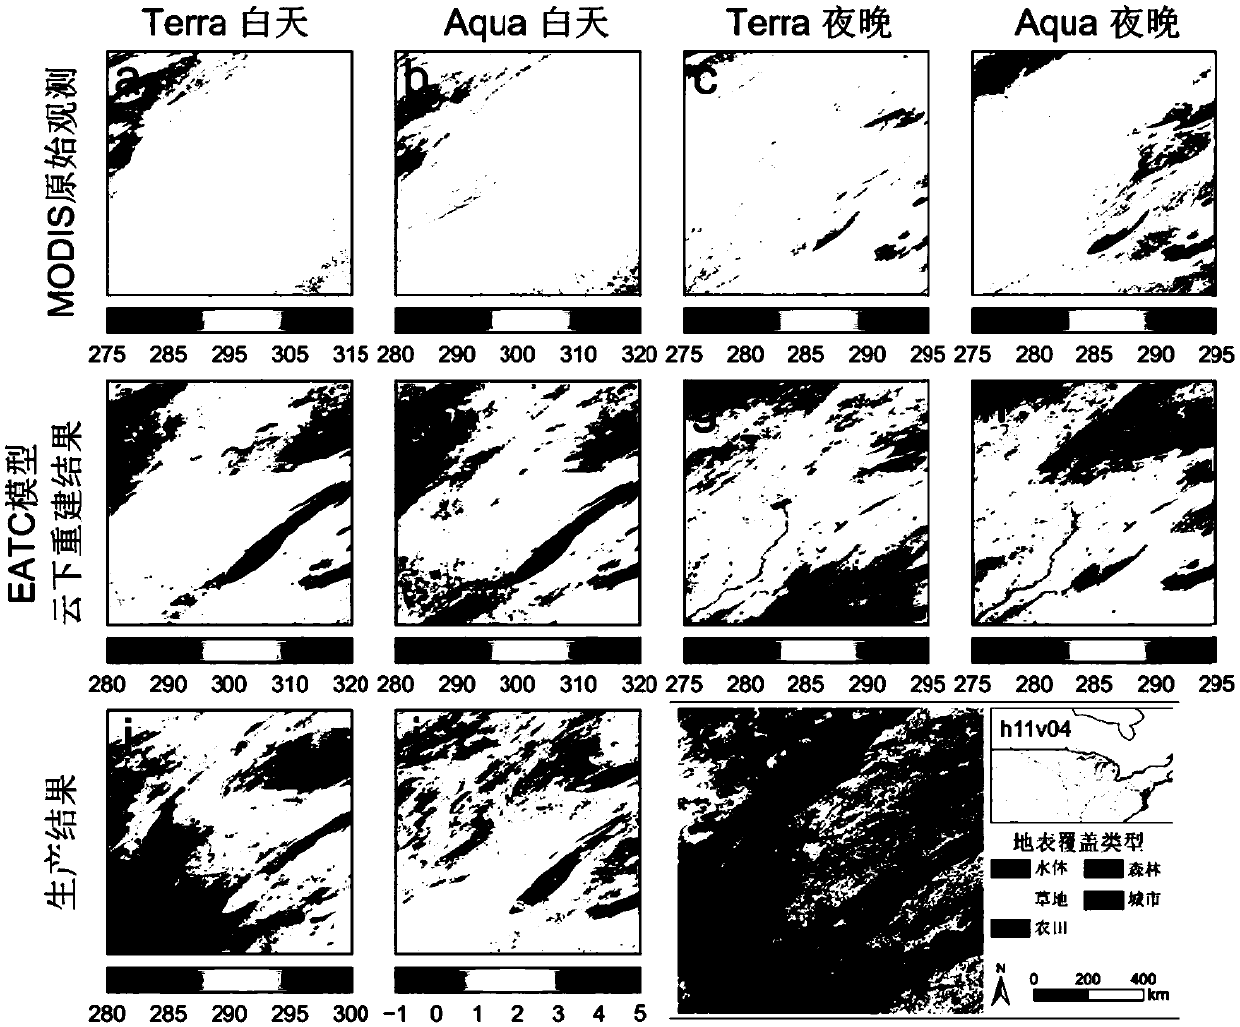 Remote sensing surface daily average temperature calculation method based on multi-time scale model